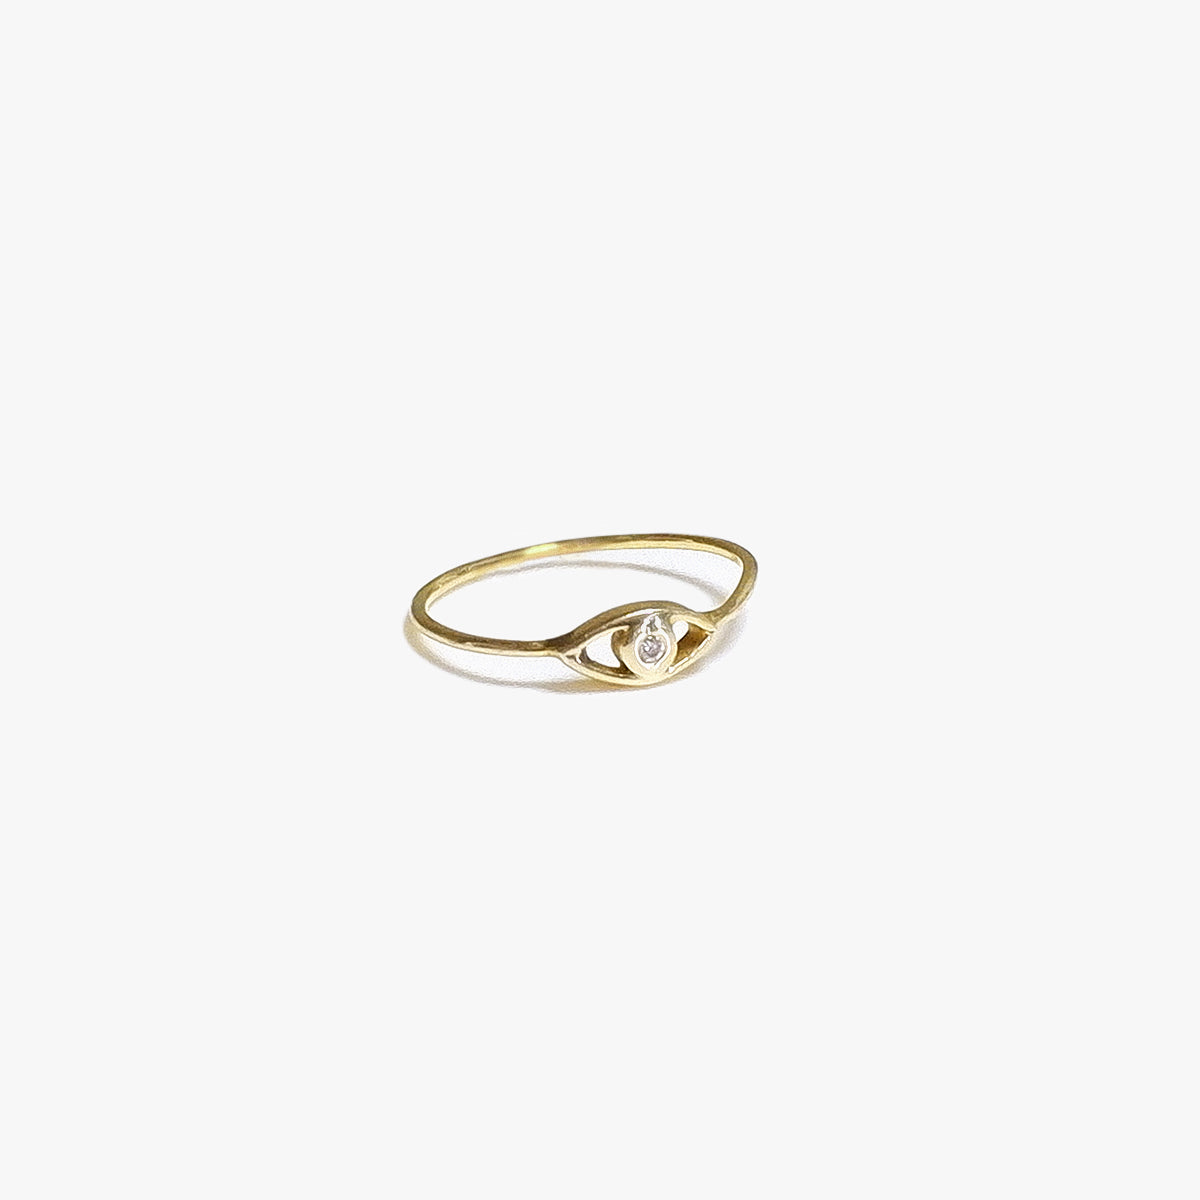 The Evil Eye Diamond Ring in Solid Gold